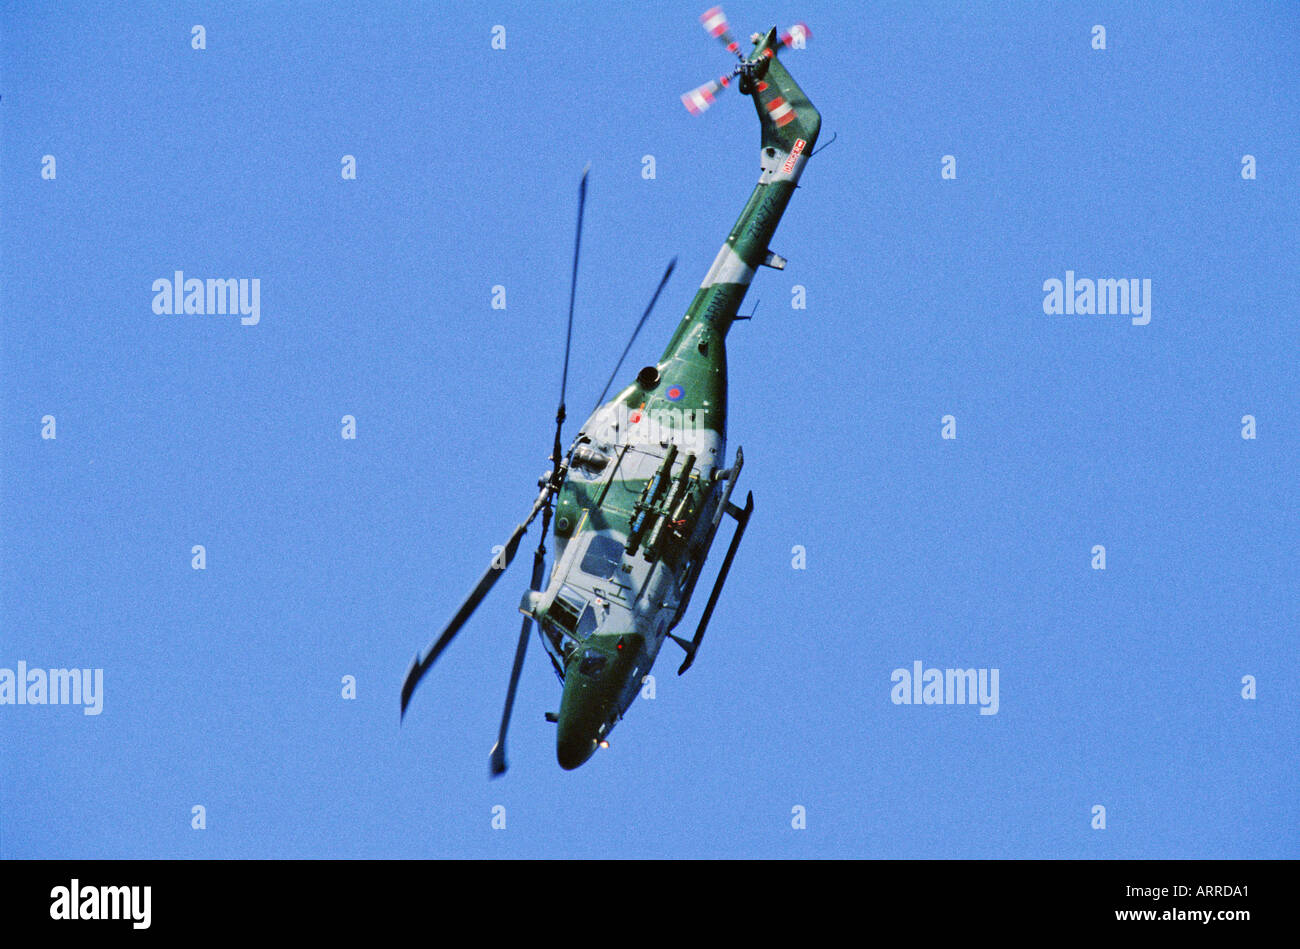 Royal Army Lynx helicopter Stock Photo